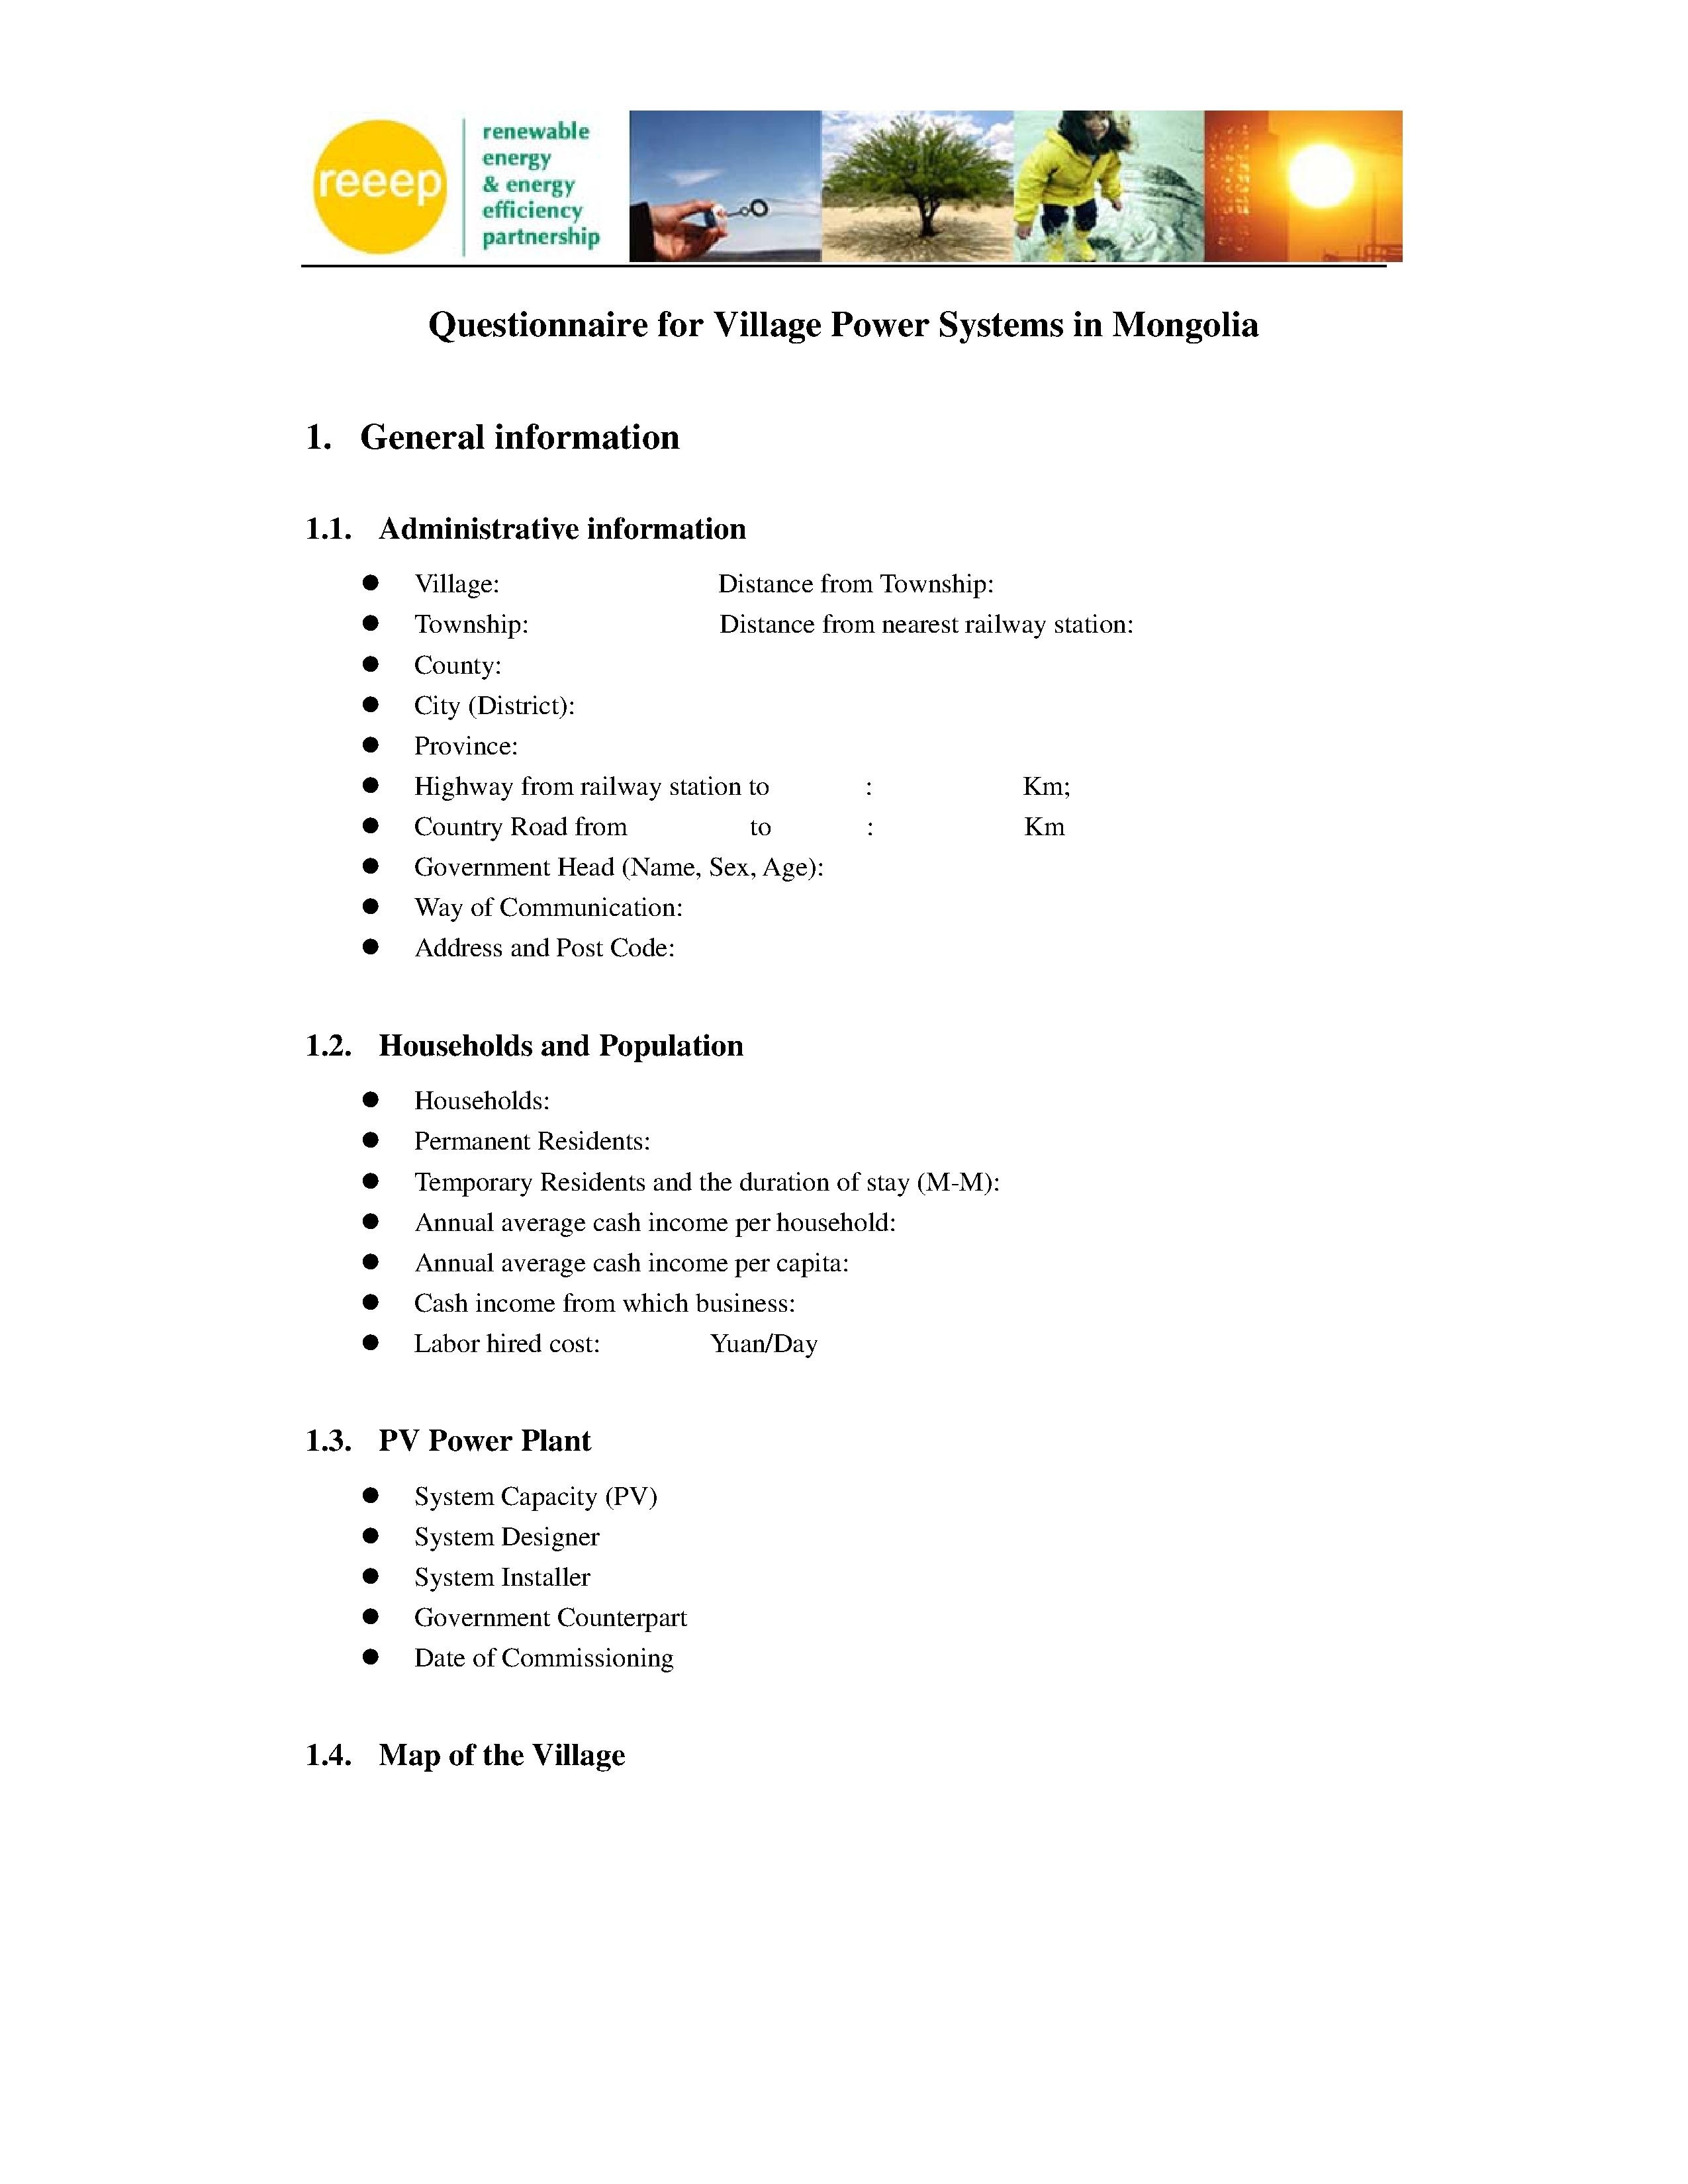 File:Questionnaire for Village Power Systems in Mongolia.pdf